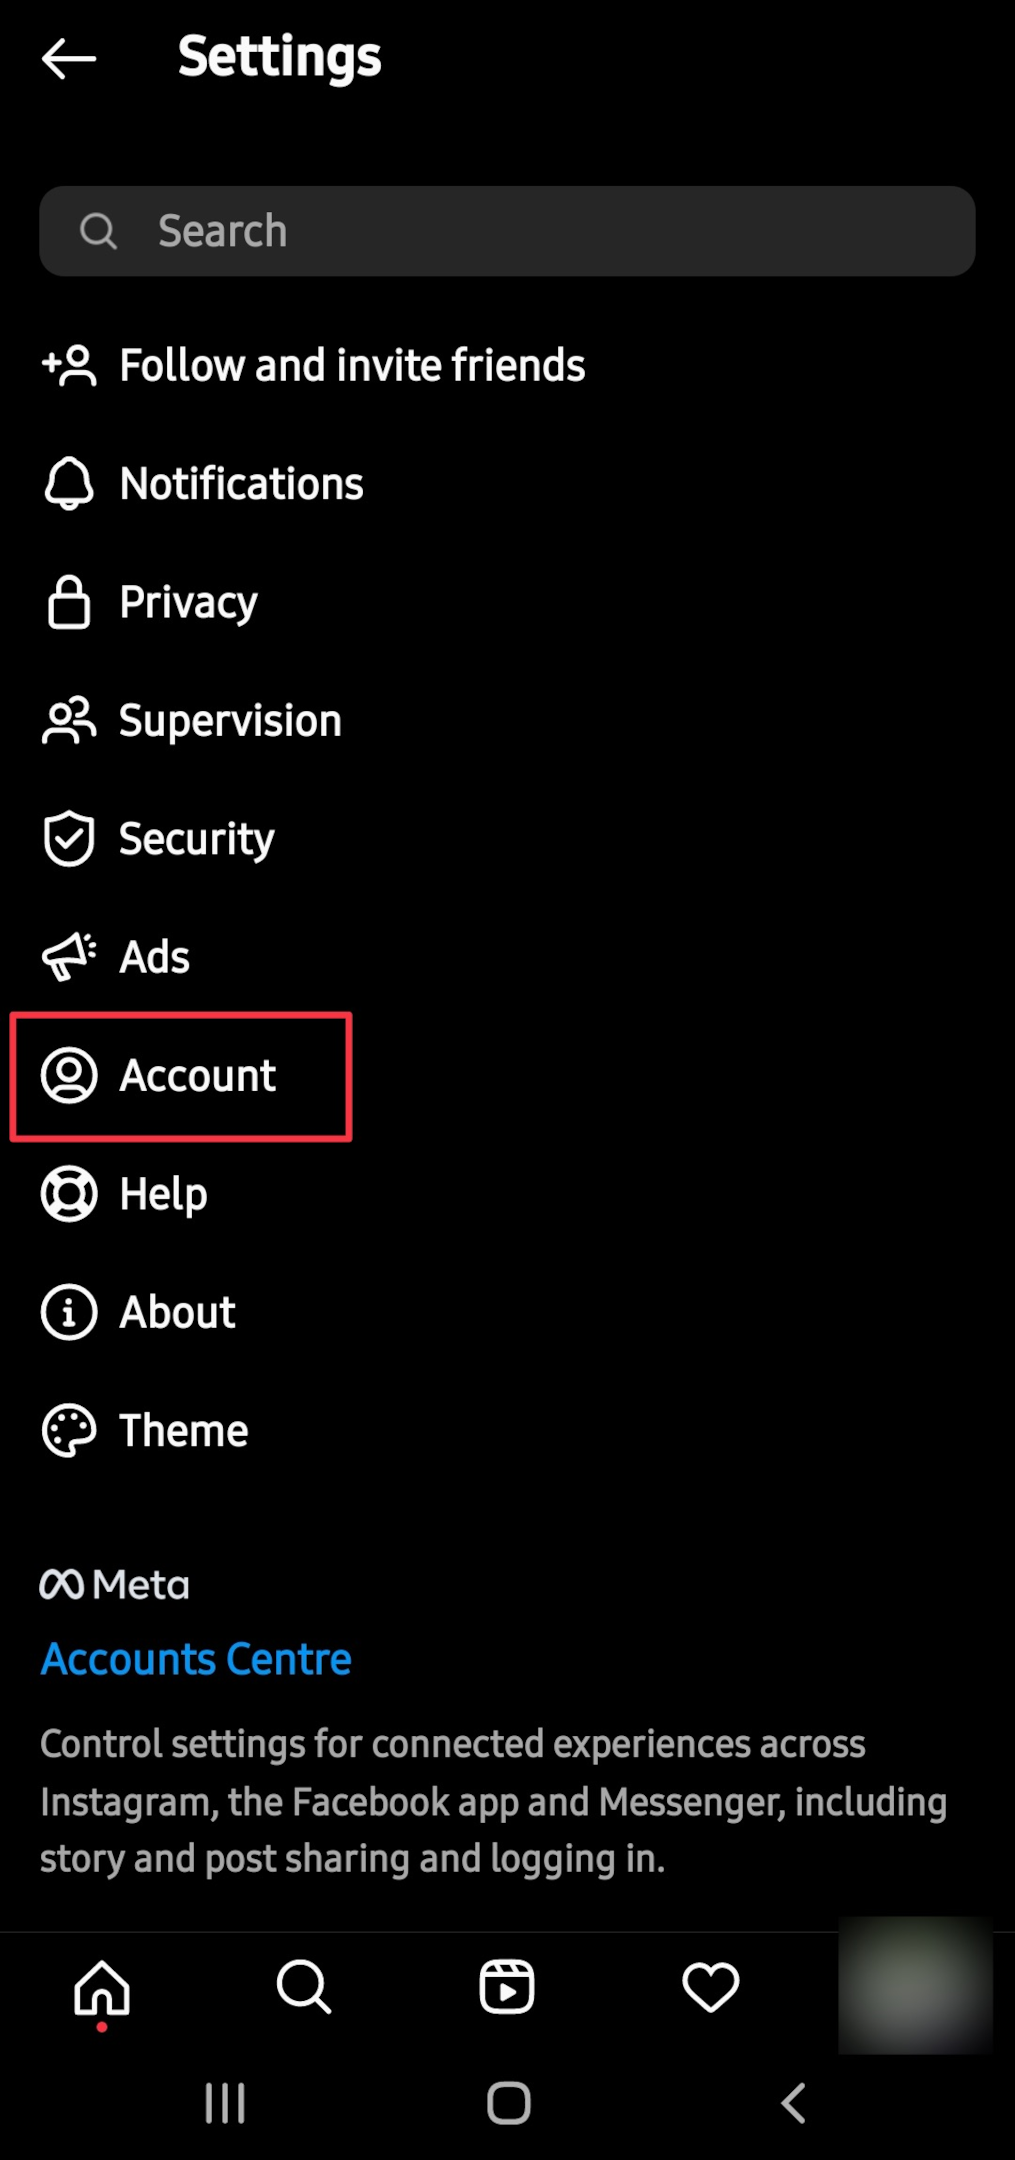 Remote.tools shows how to switch your account type